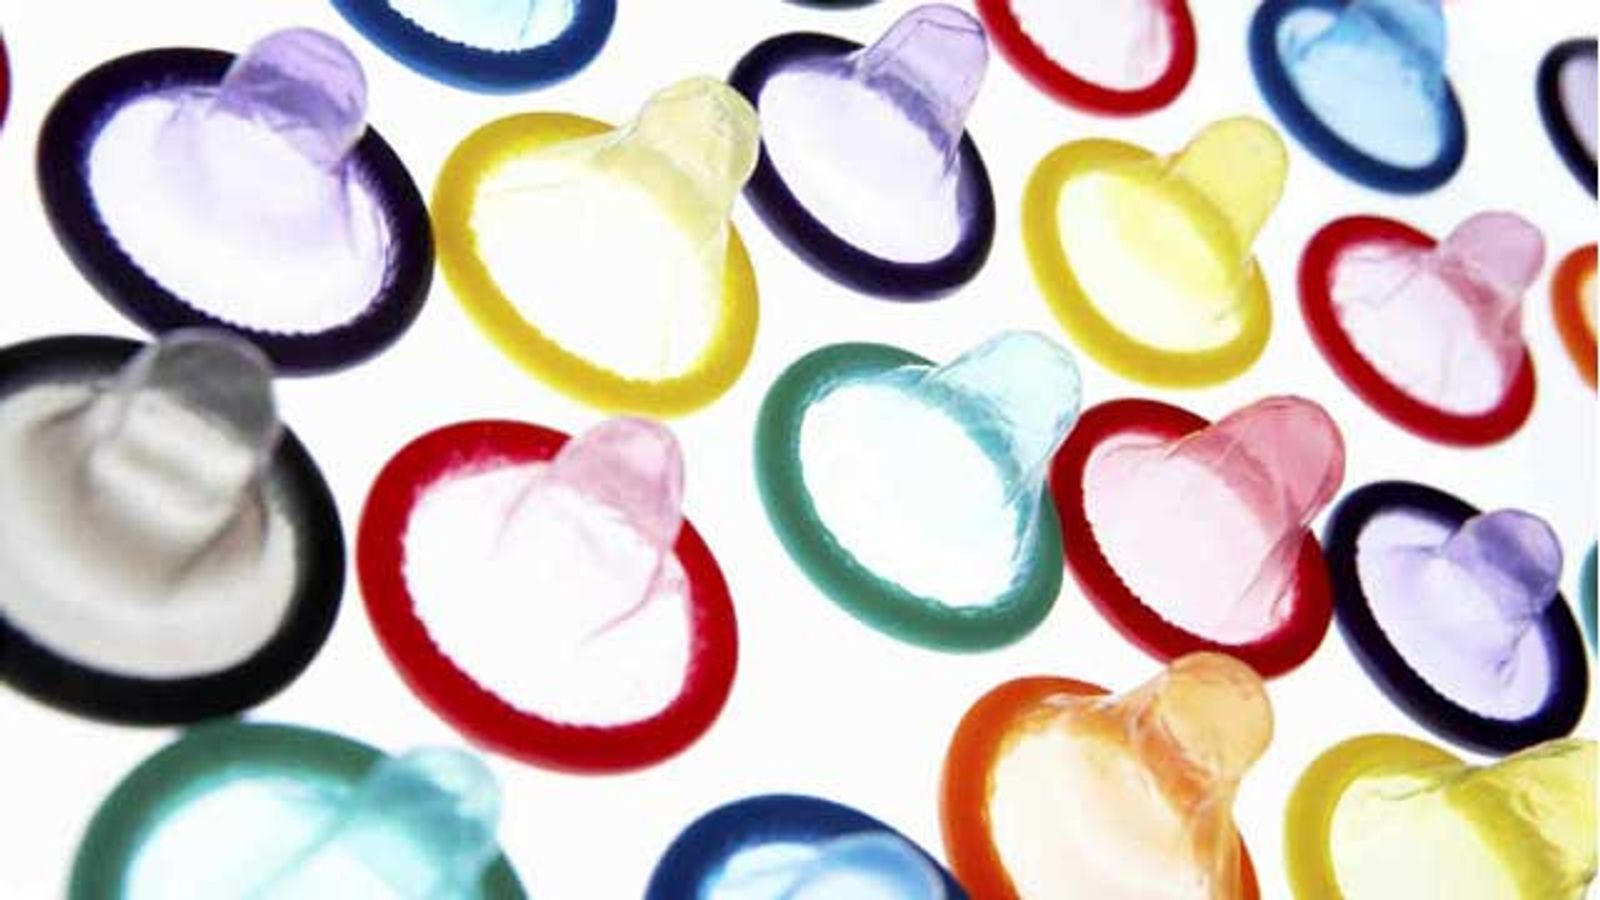 City Finally Issues Its Report on Condom Ordinance Compliance